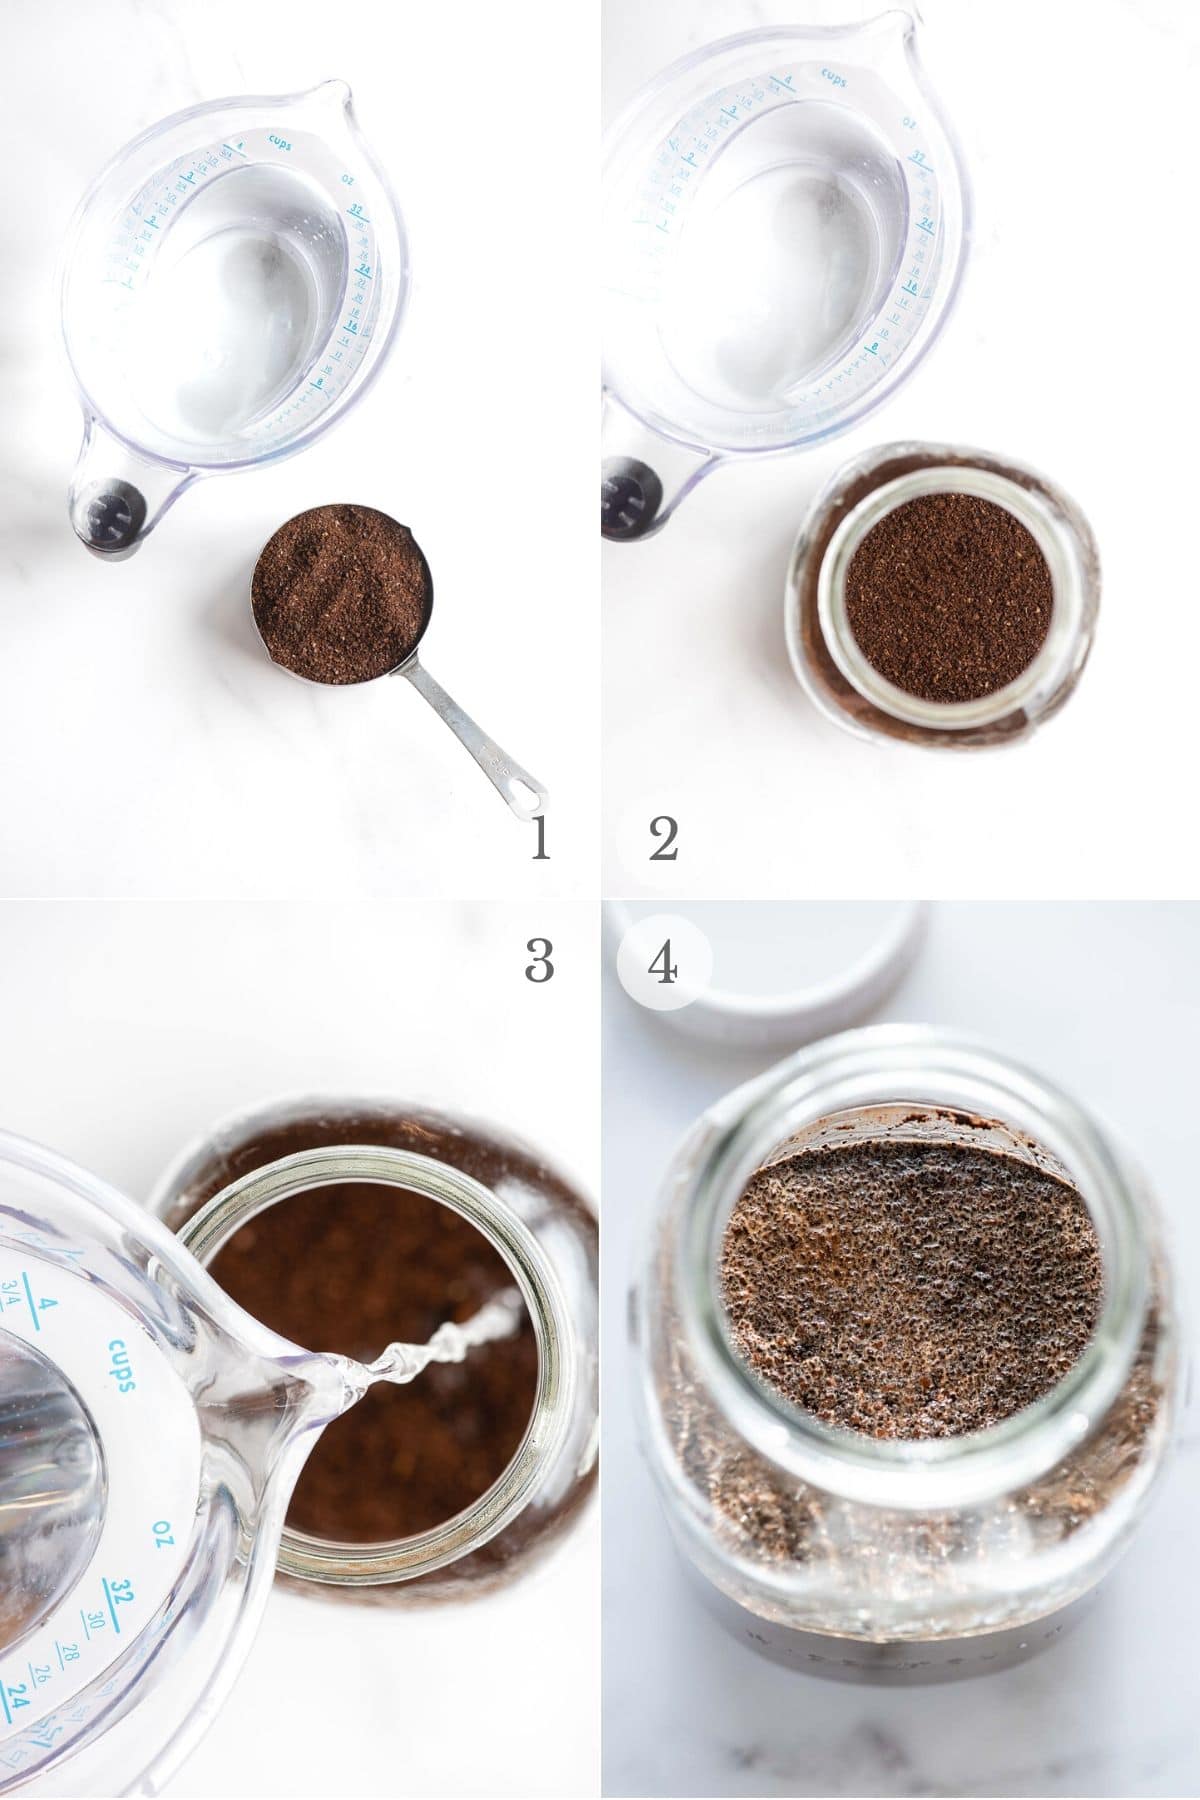 Steps to make Cold Brew Coffee (photo collage) adding coffee to water in glass jar